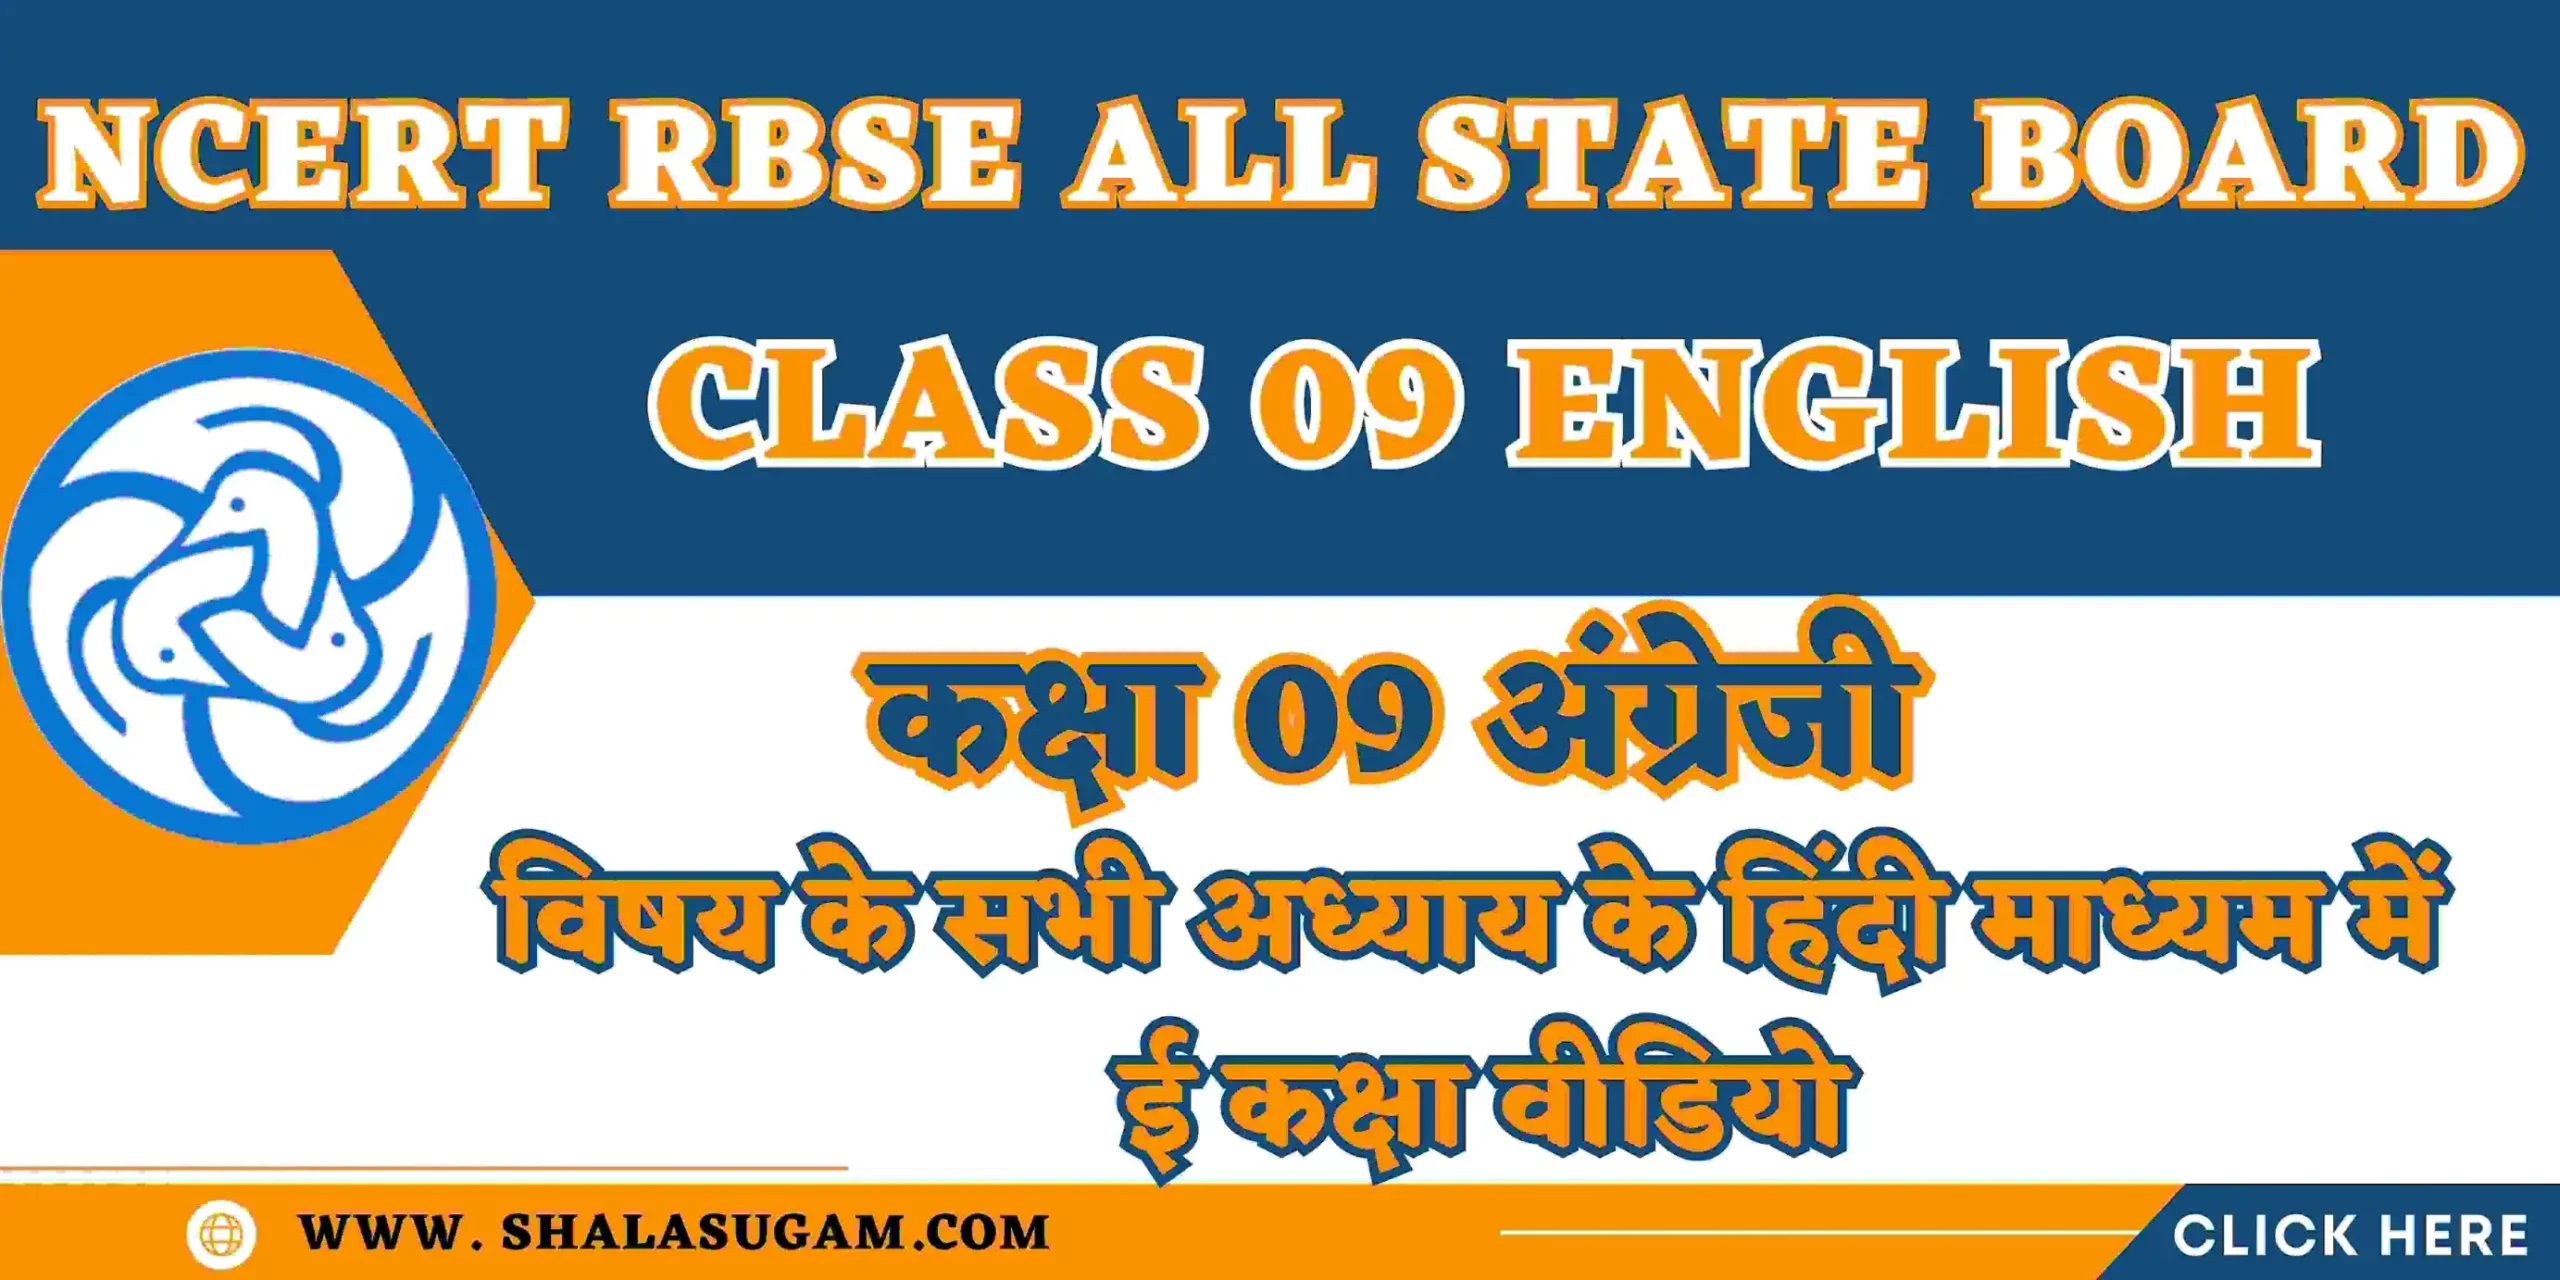 NCERT RBSE CLASS 09 ENGLISH CHAPTERS VIDEOS